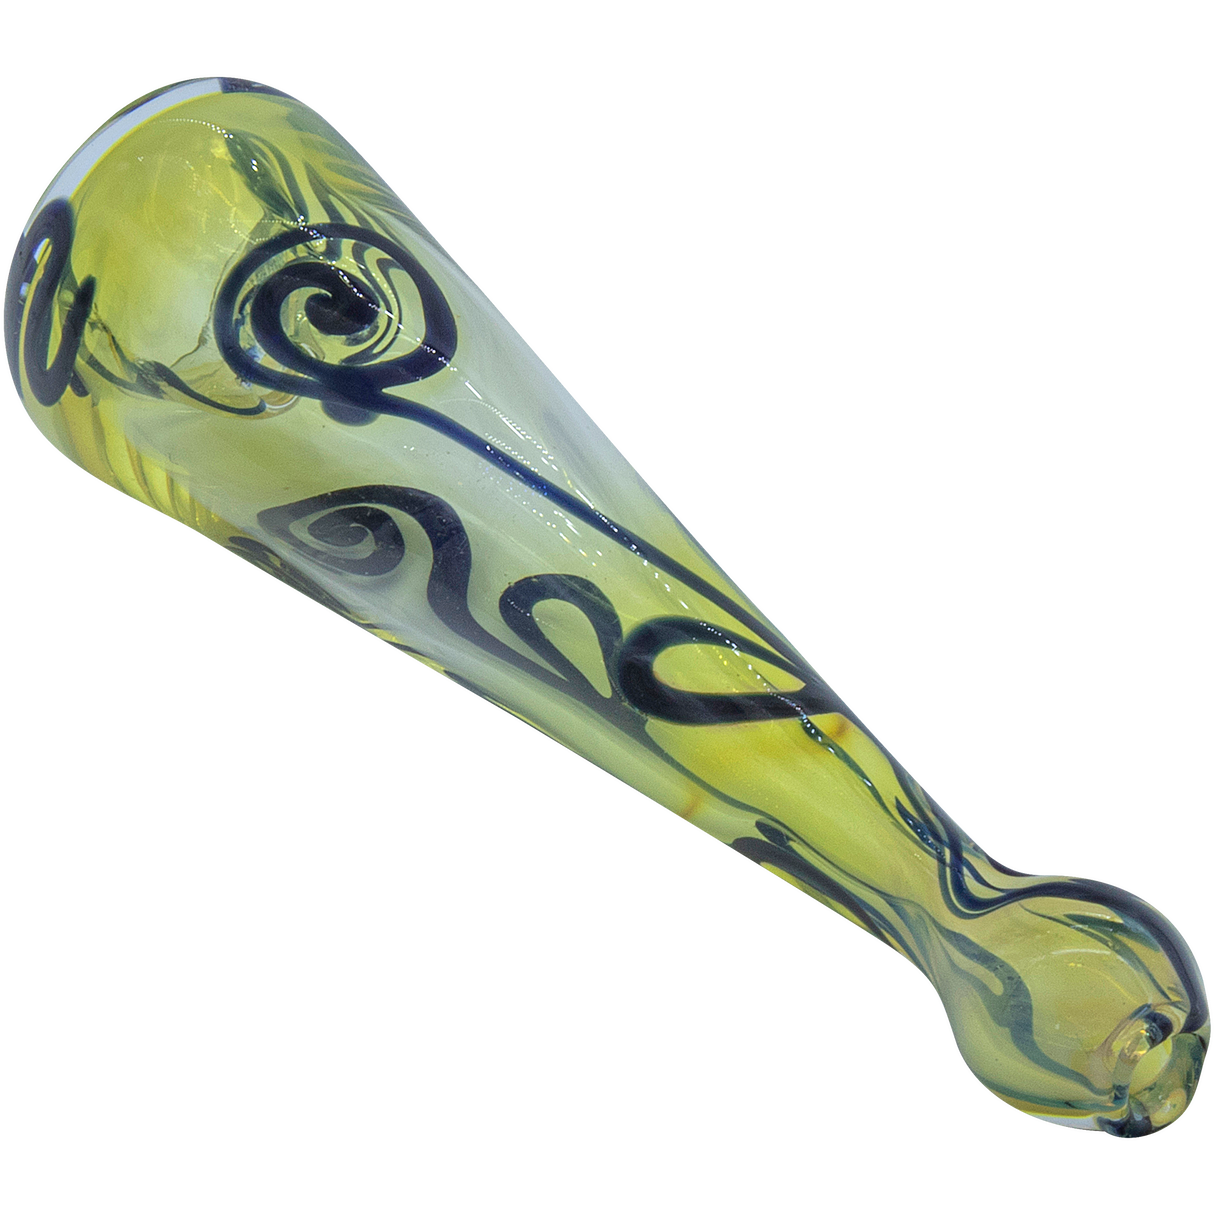 LA Pipes Inside-Out Funnel Chillum Herb Pipe, Fumed Color Changing Design, 4.5" Long